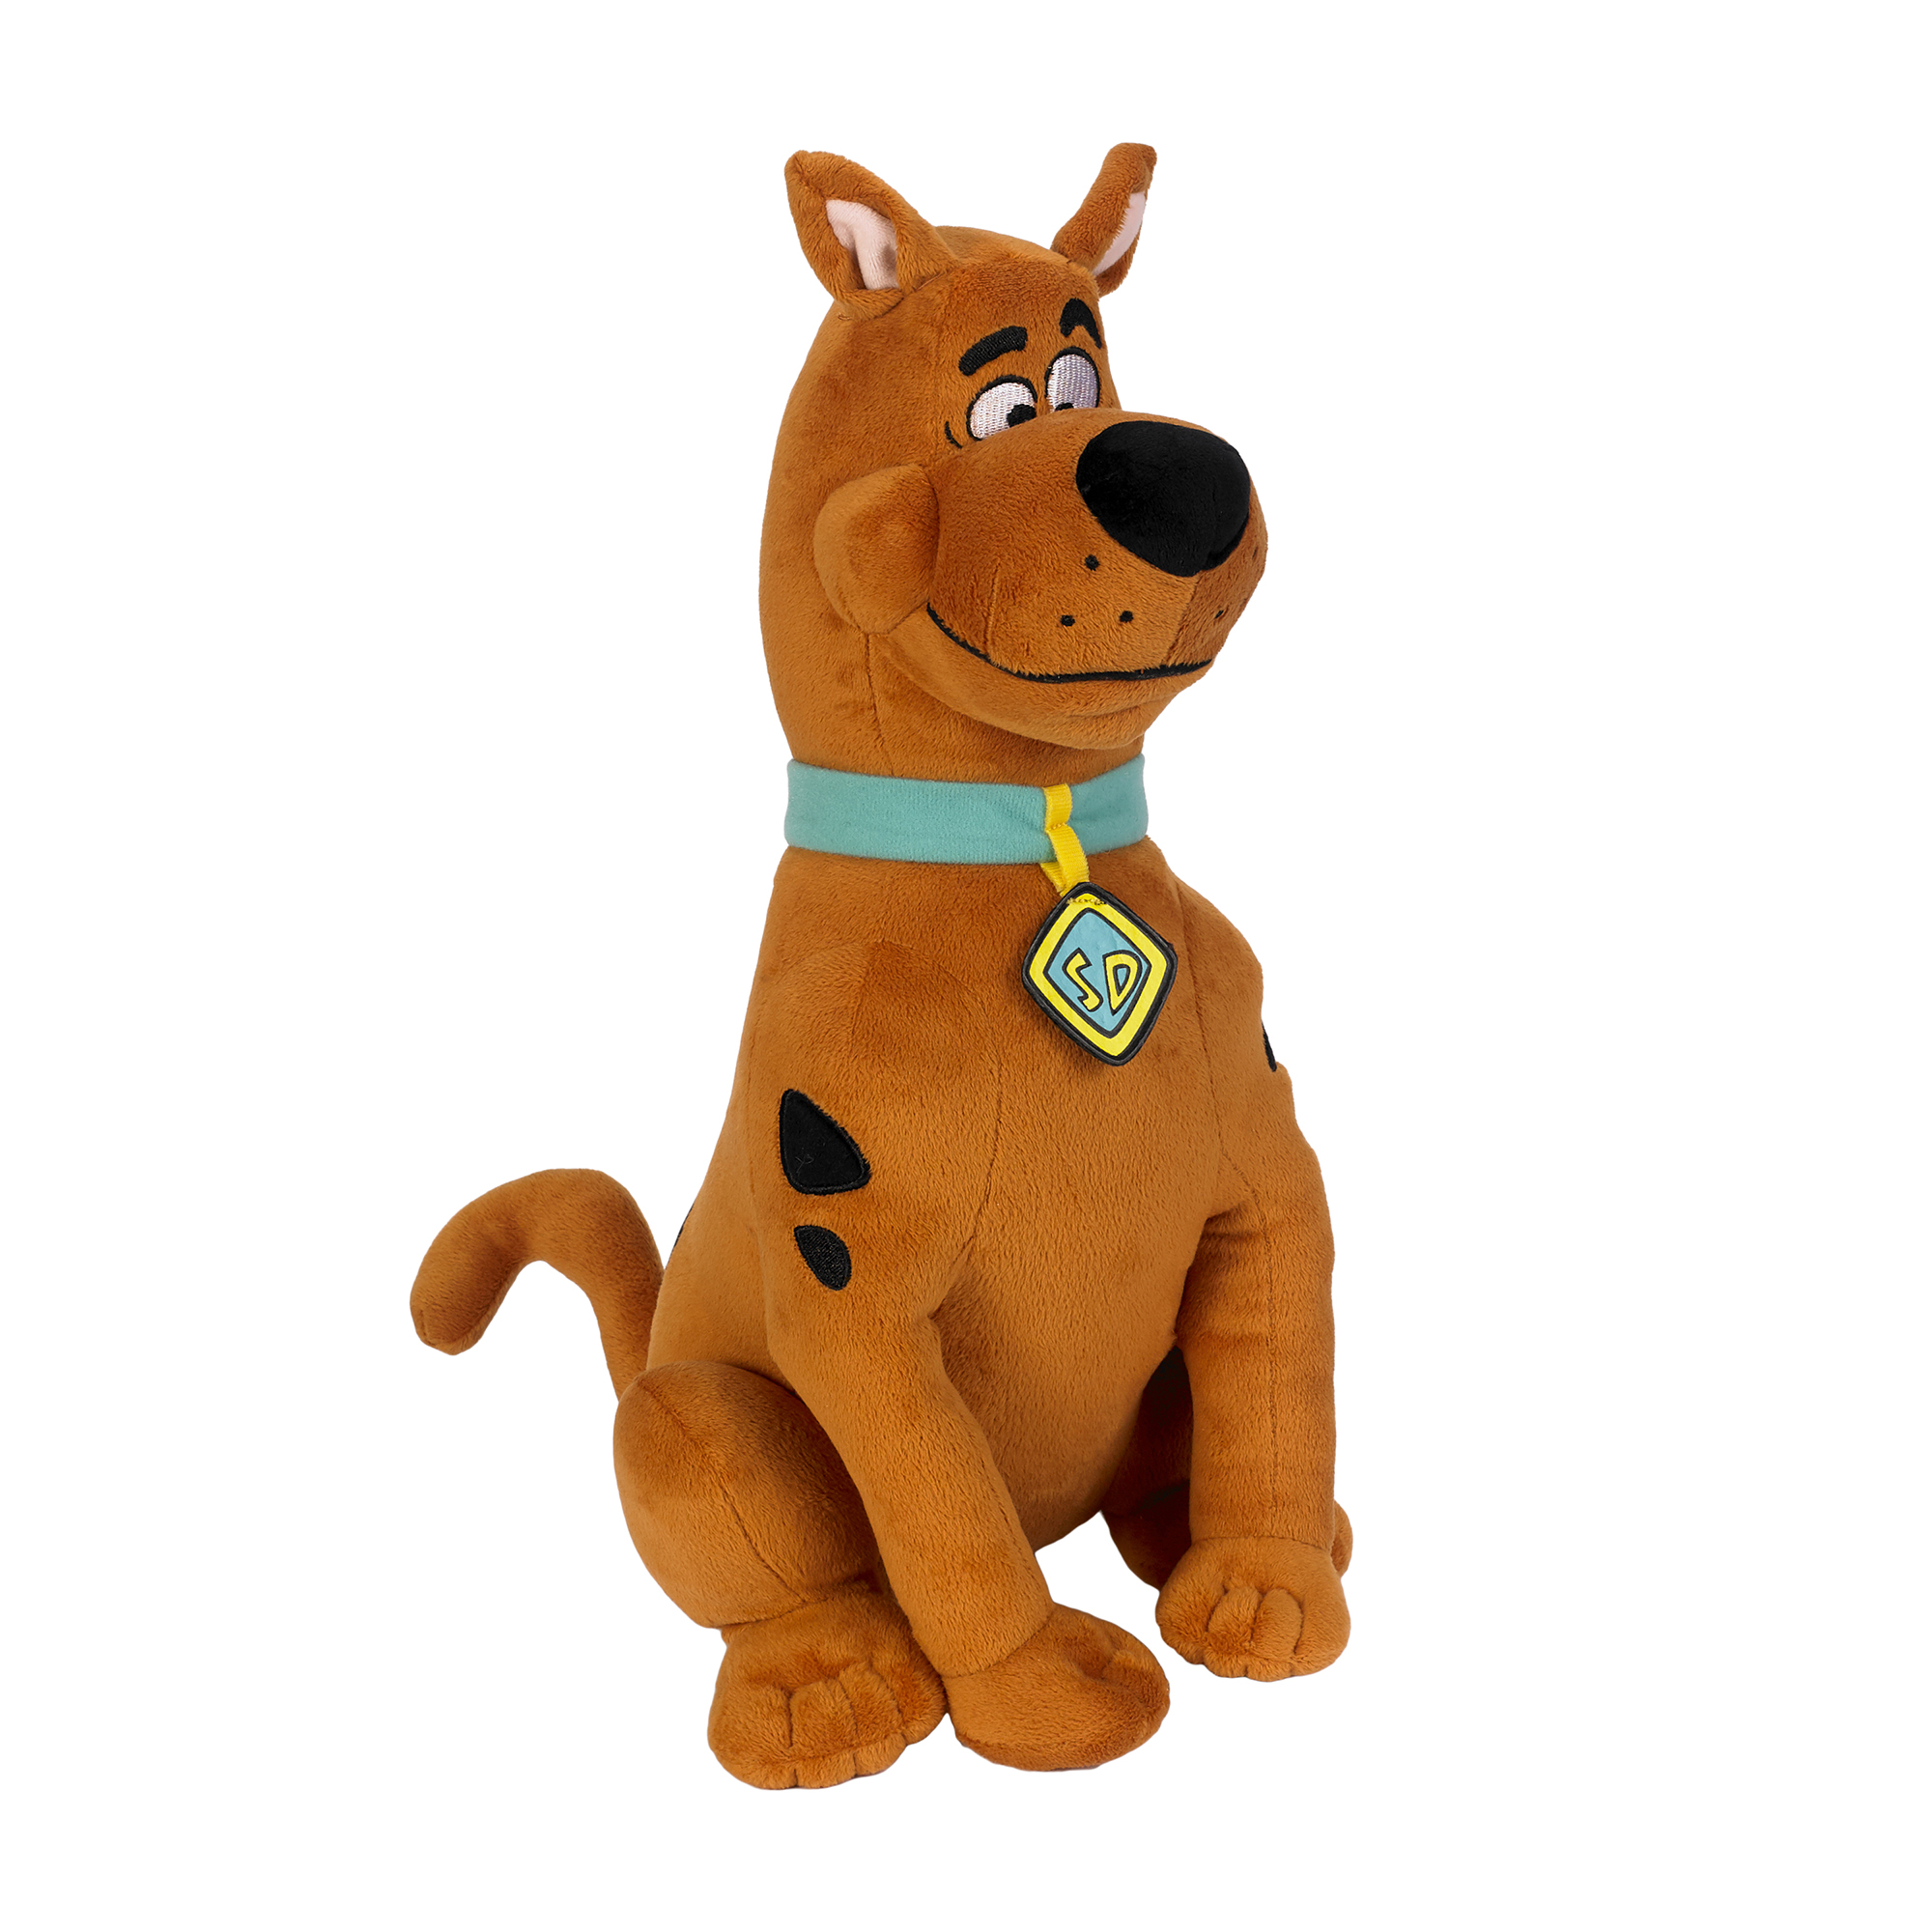 SCOOB! Scooby-Doo Kids Bedding Super Soft Plush Snuggle Cuddle Pillow, Scooby - image 1 of 6